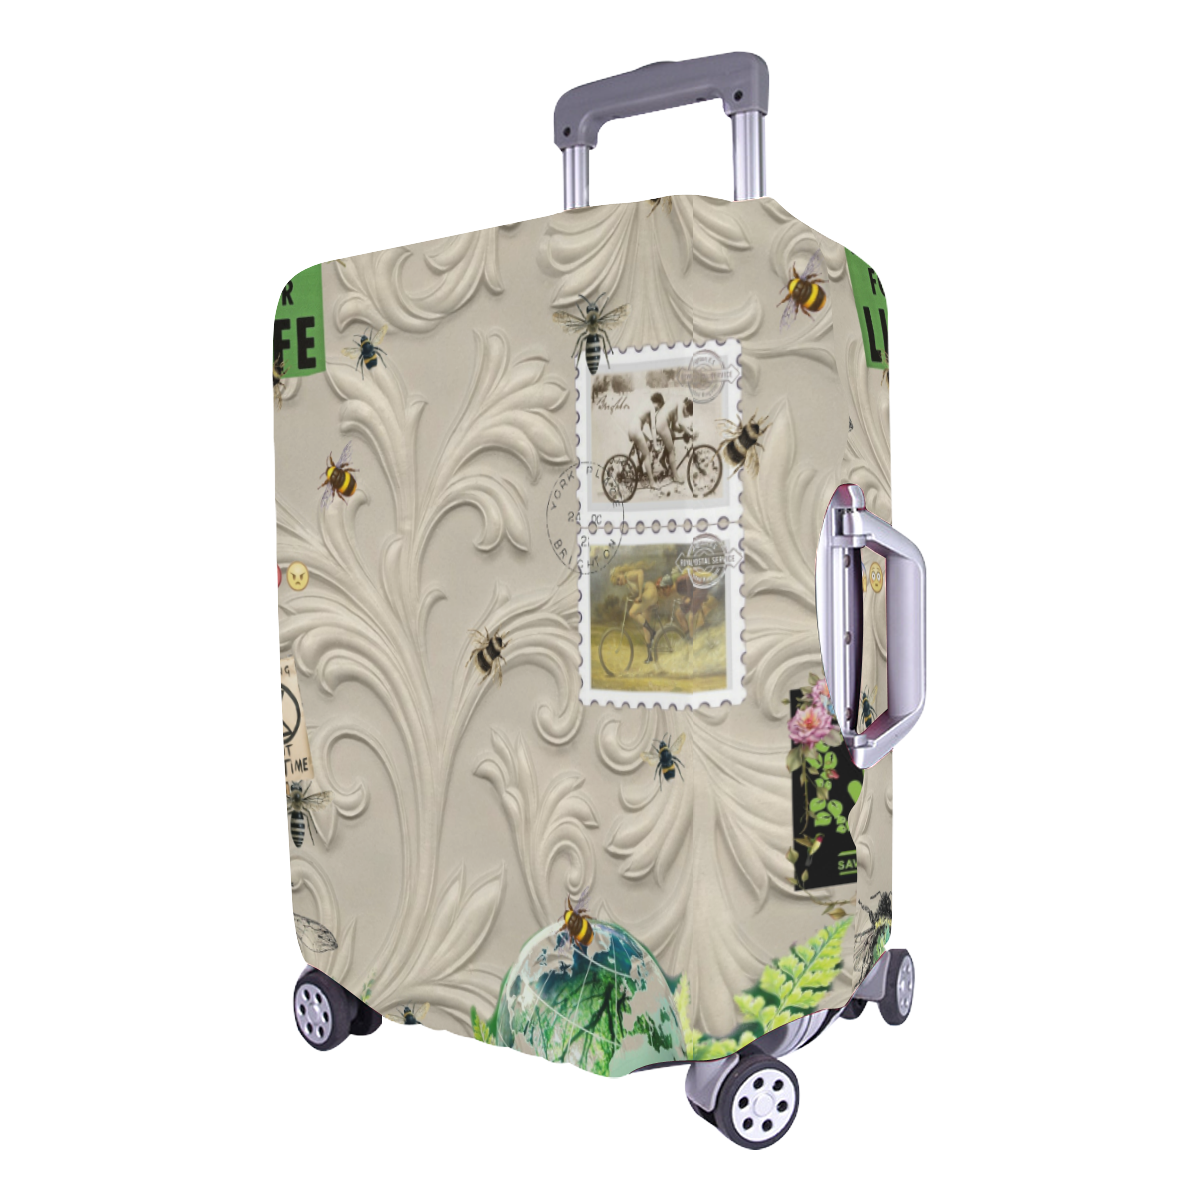 Running Out of Time 1 Luggage Cover/Large 26"-28"